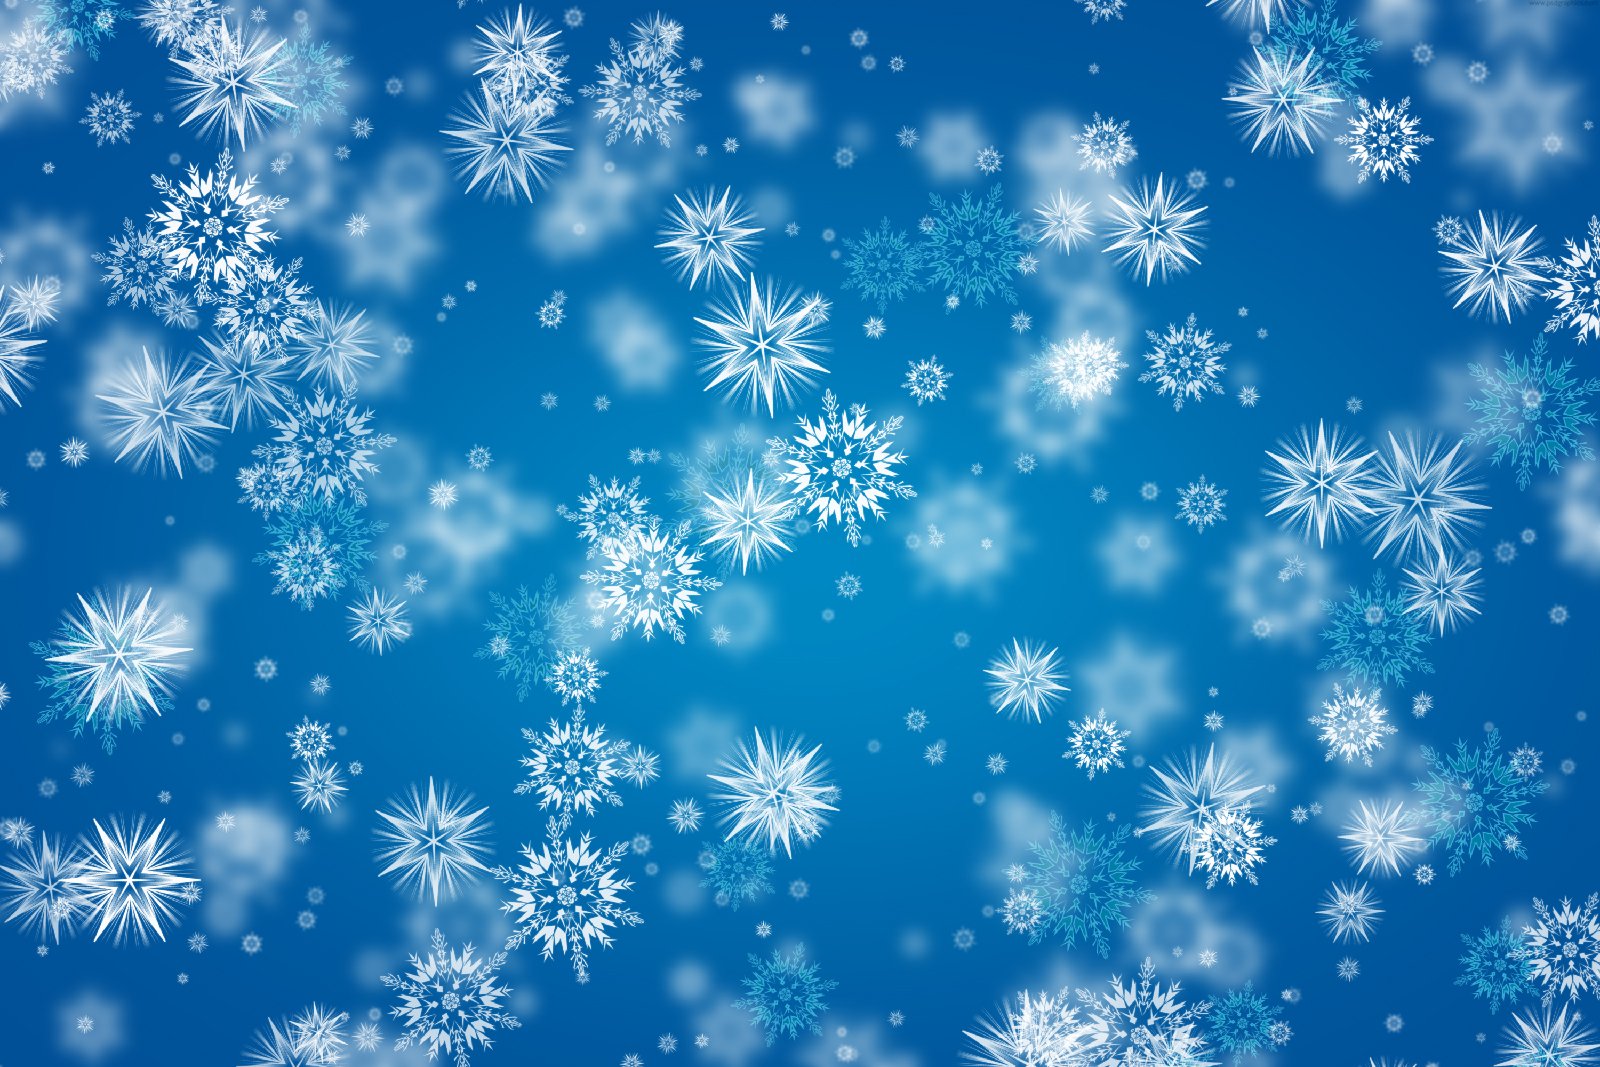 Blue winter snowflakes background PSD - PSDgraphics